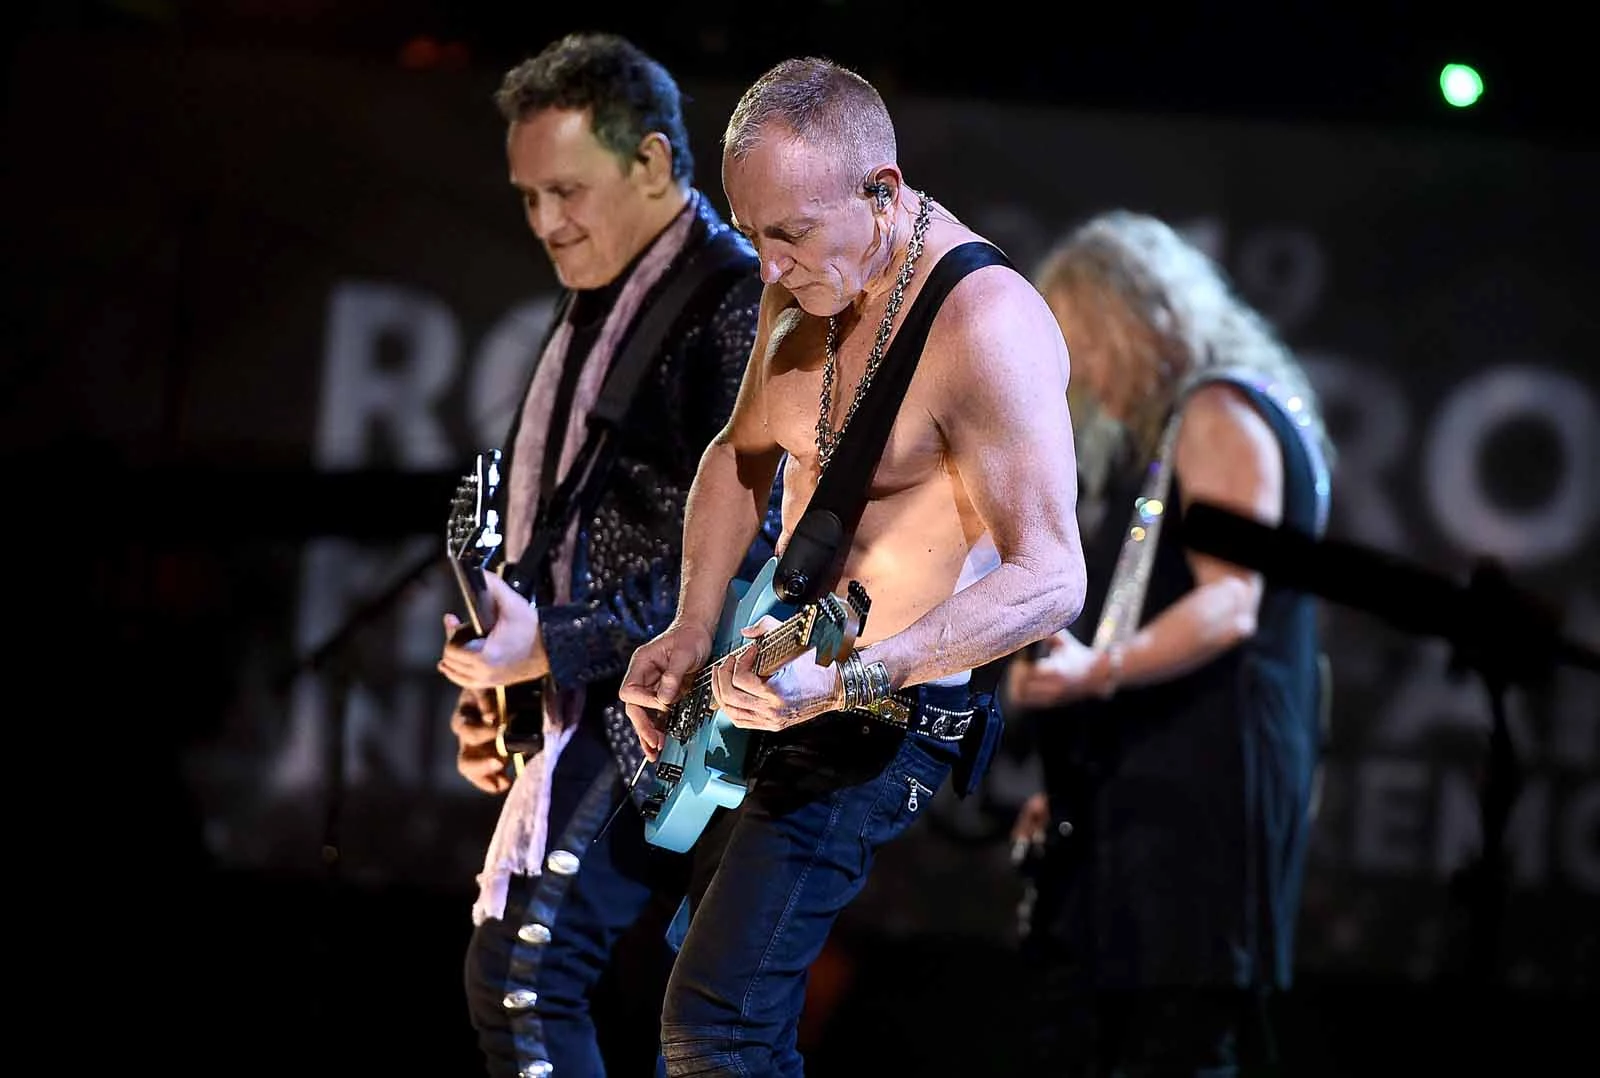 Hopeful Def Leppard Already at a 'Starting Point' for Next Album